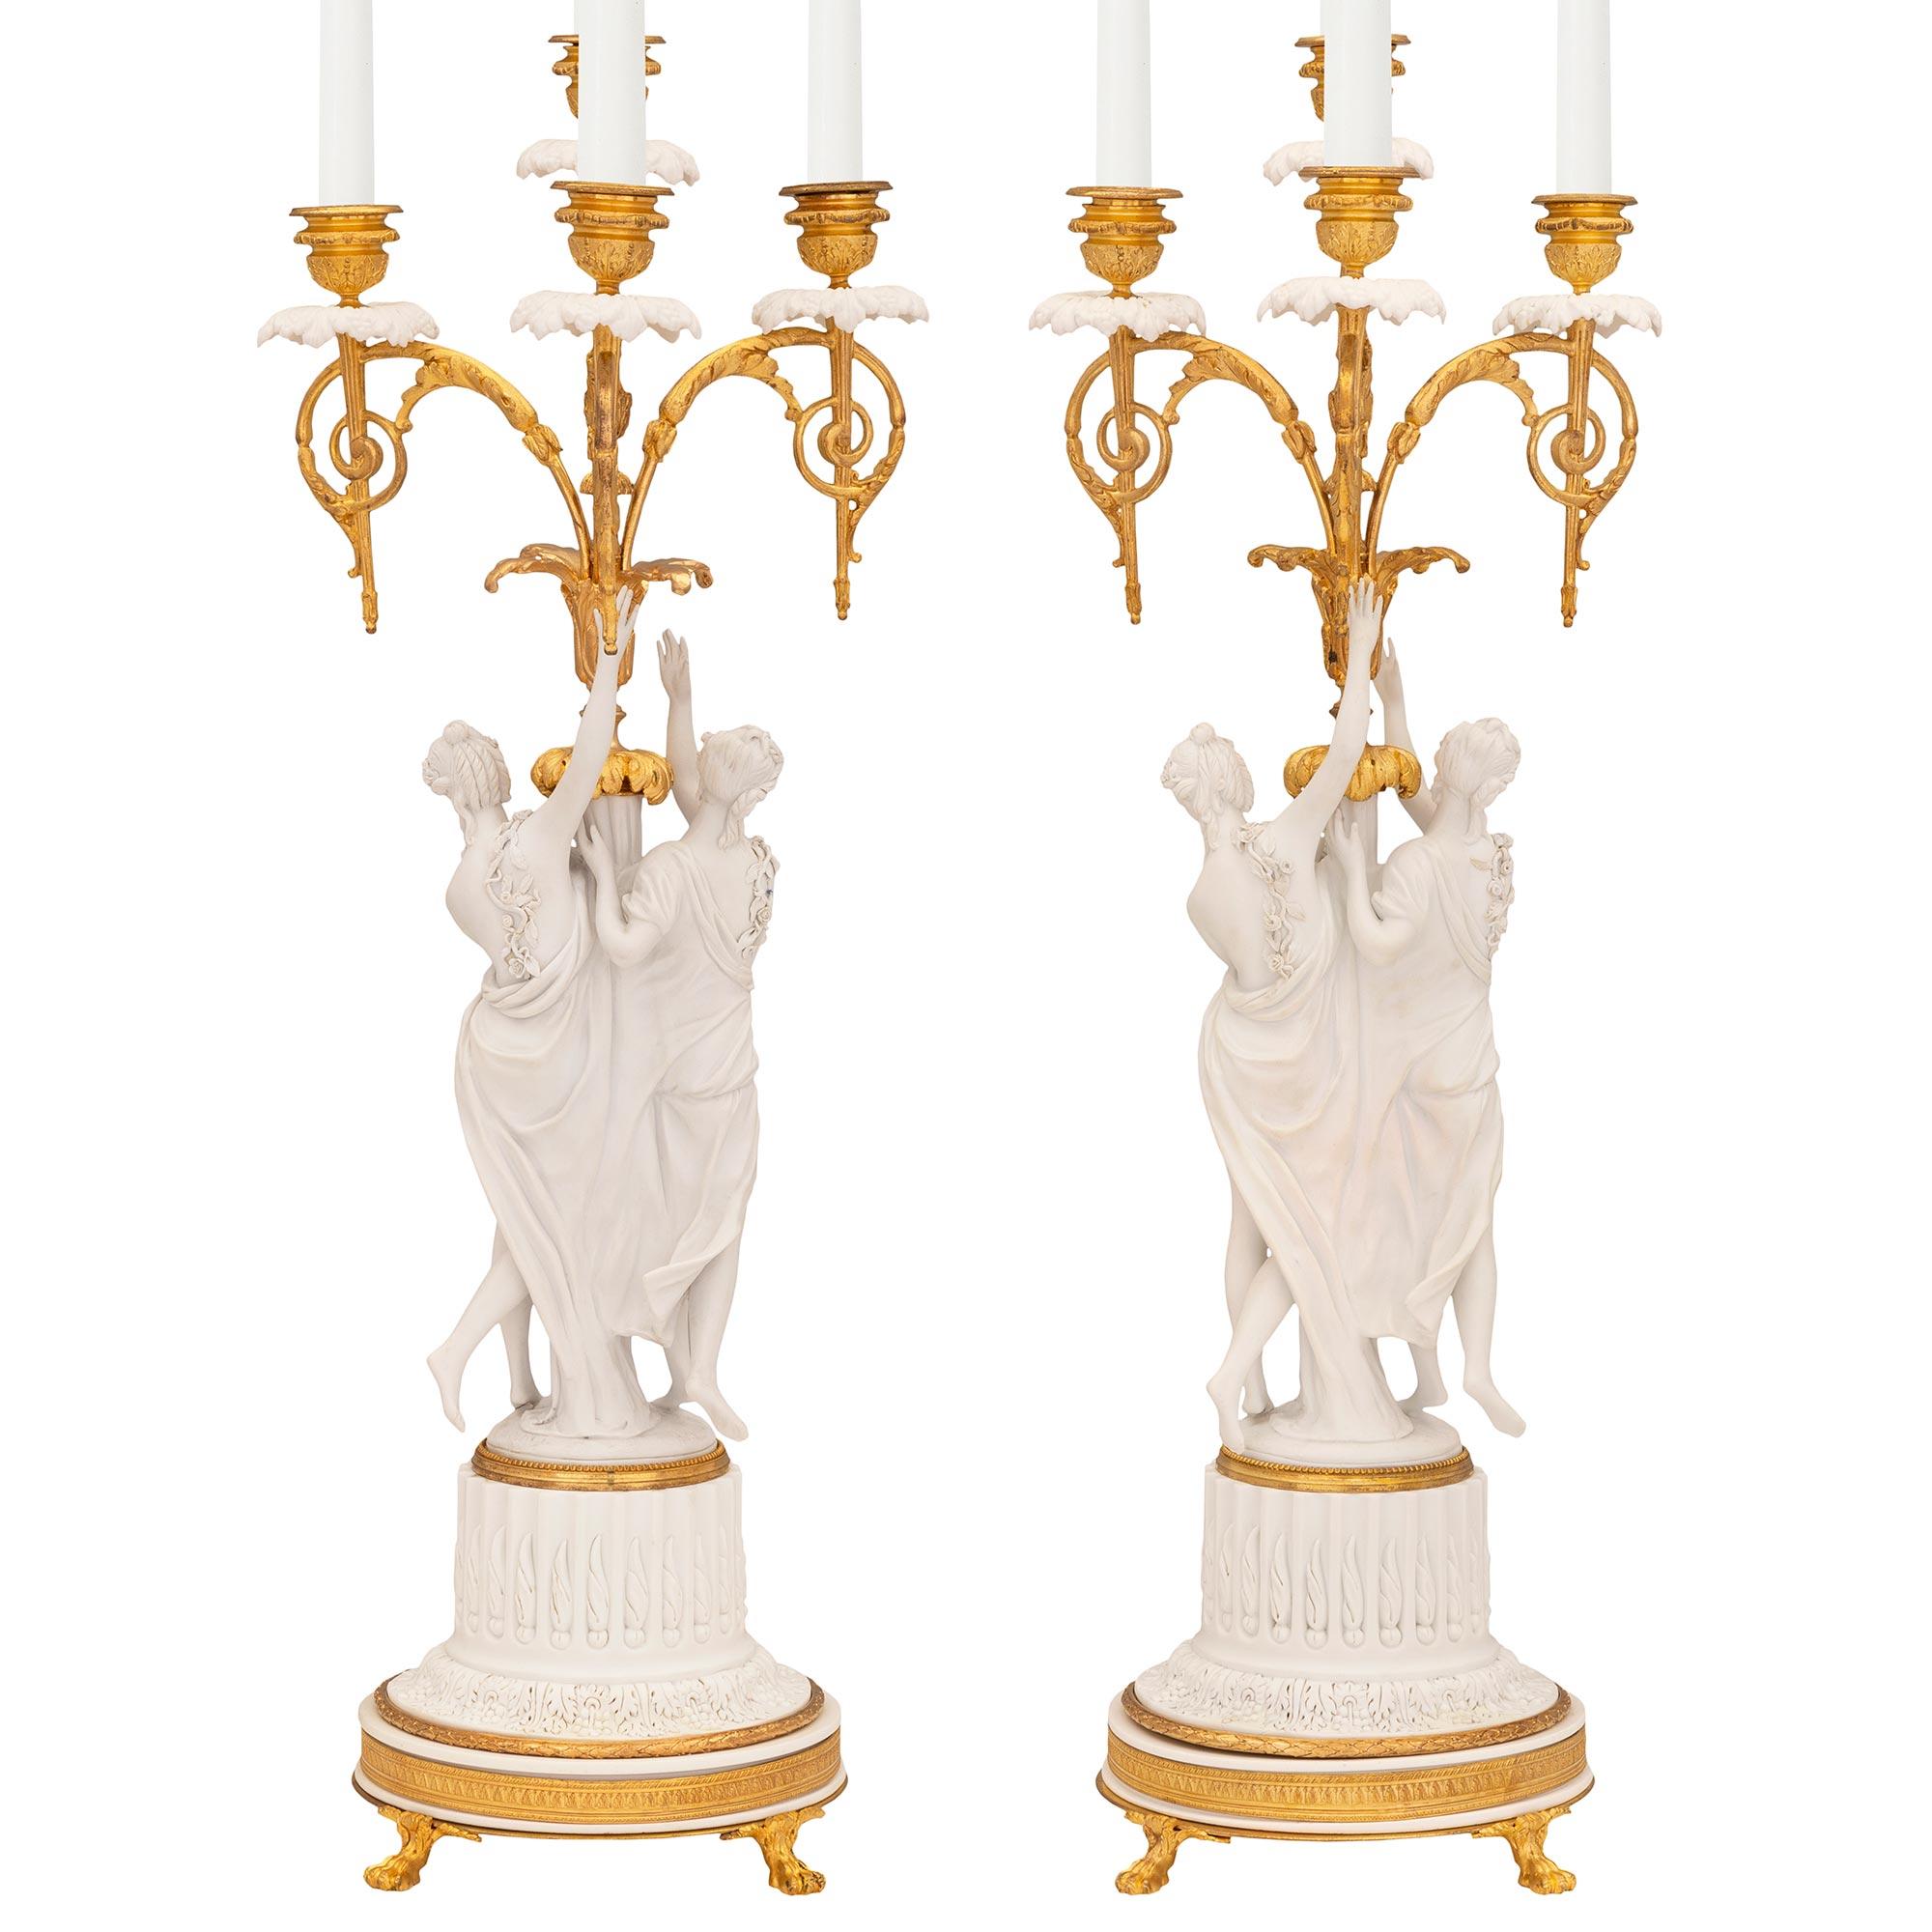 A stunning and very high quality pair of French 19th century Louis XVI st. ormolu and Biscuit de Sèvres porcelain candelabras, signed Sèvres and after a model by Lagneau. Each four arm candelabra is raised by handsome paw feet below an elegant